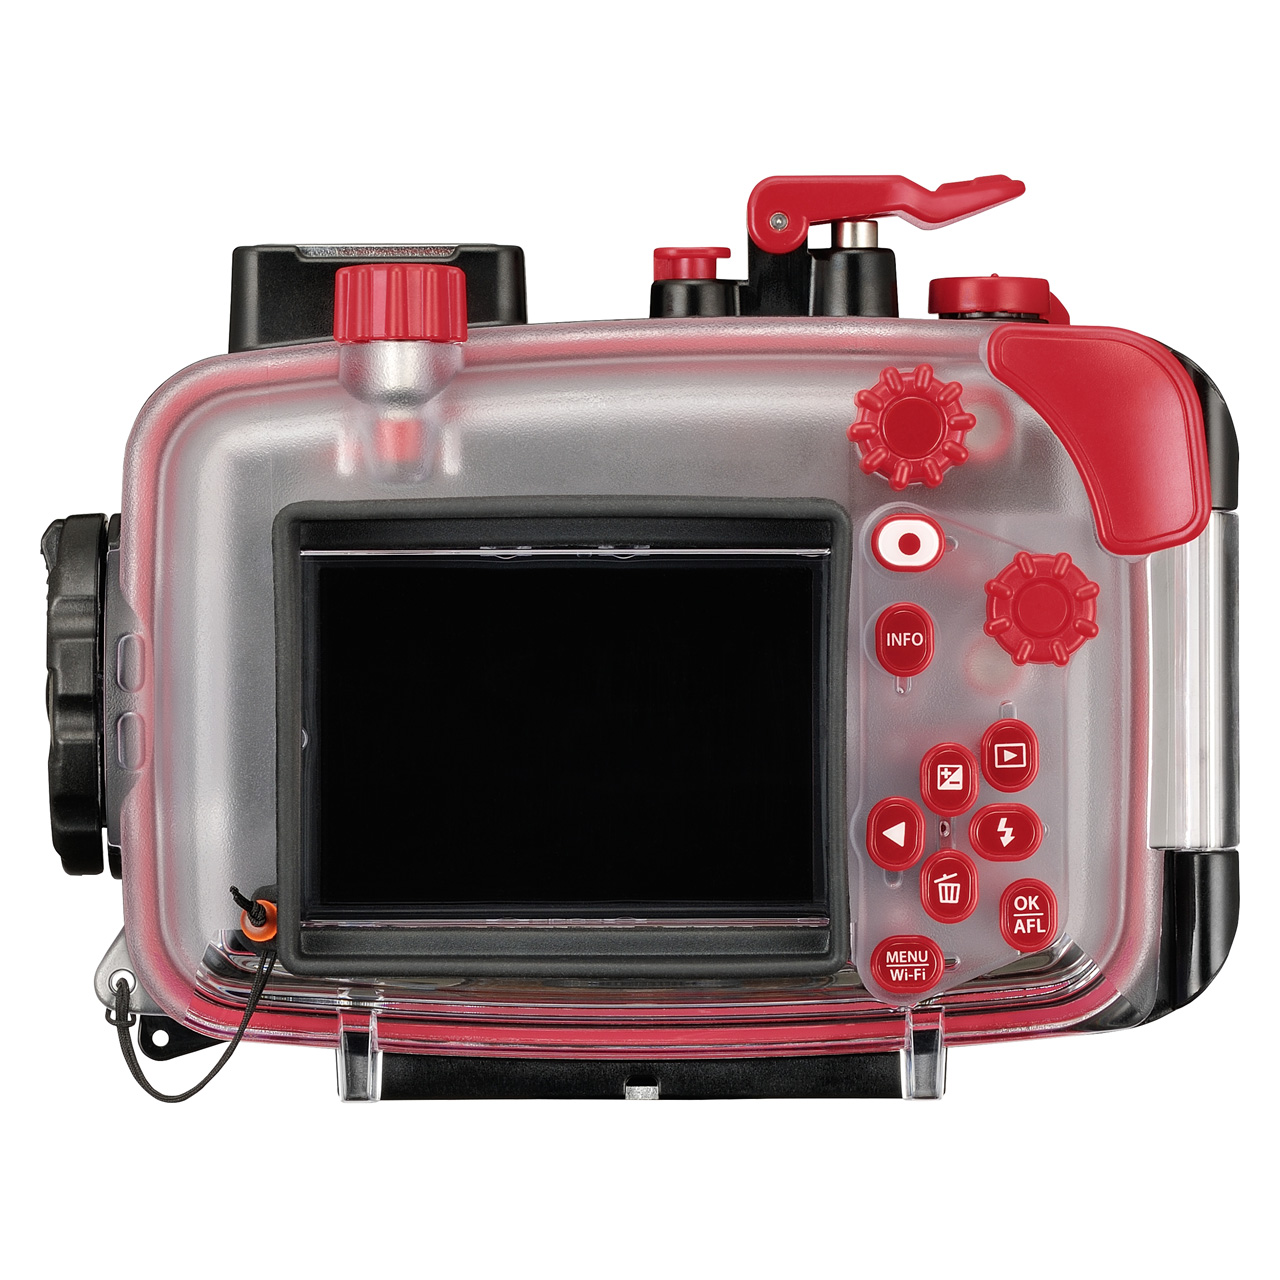 Olympus PCK-TG6-RED Tough TG-6 and PT-059 Package